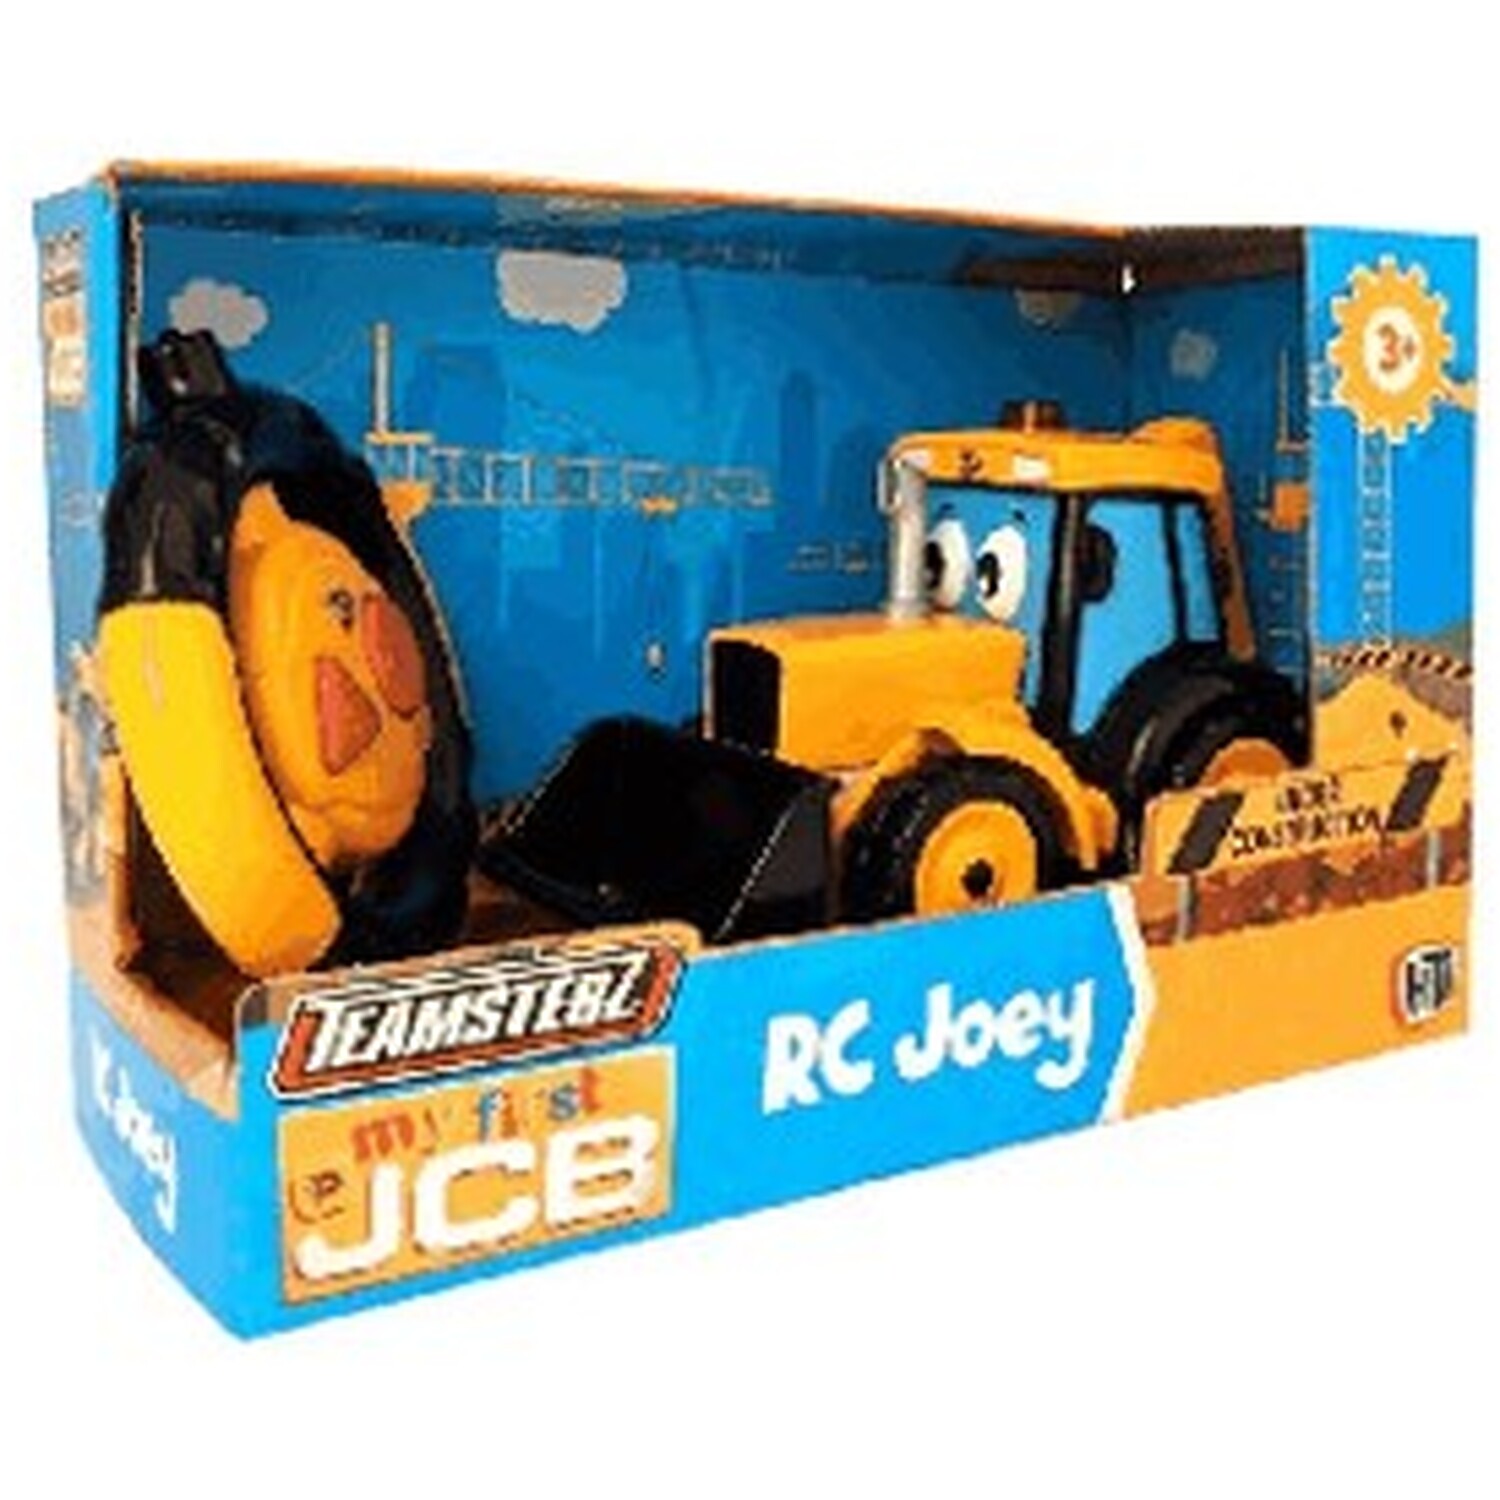 Teamsterz My First JCB RC Joey Toy Truck Image